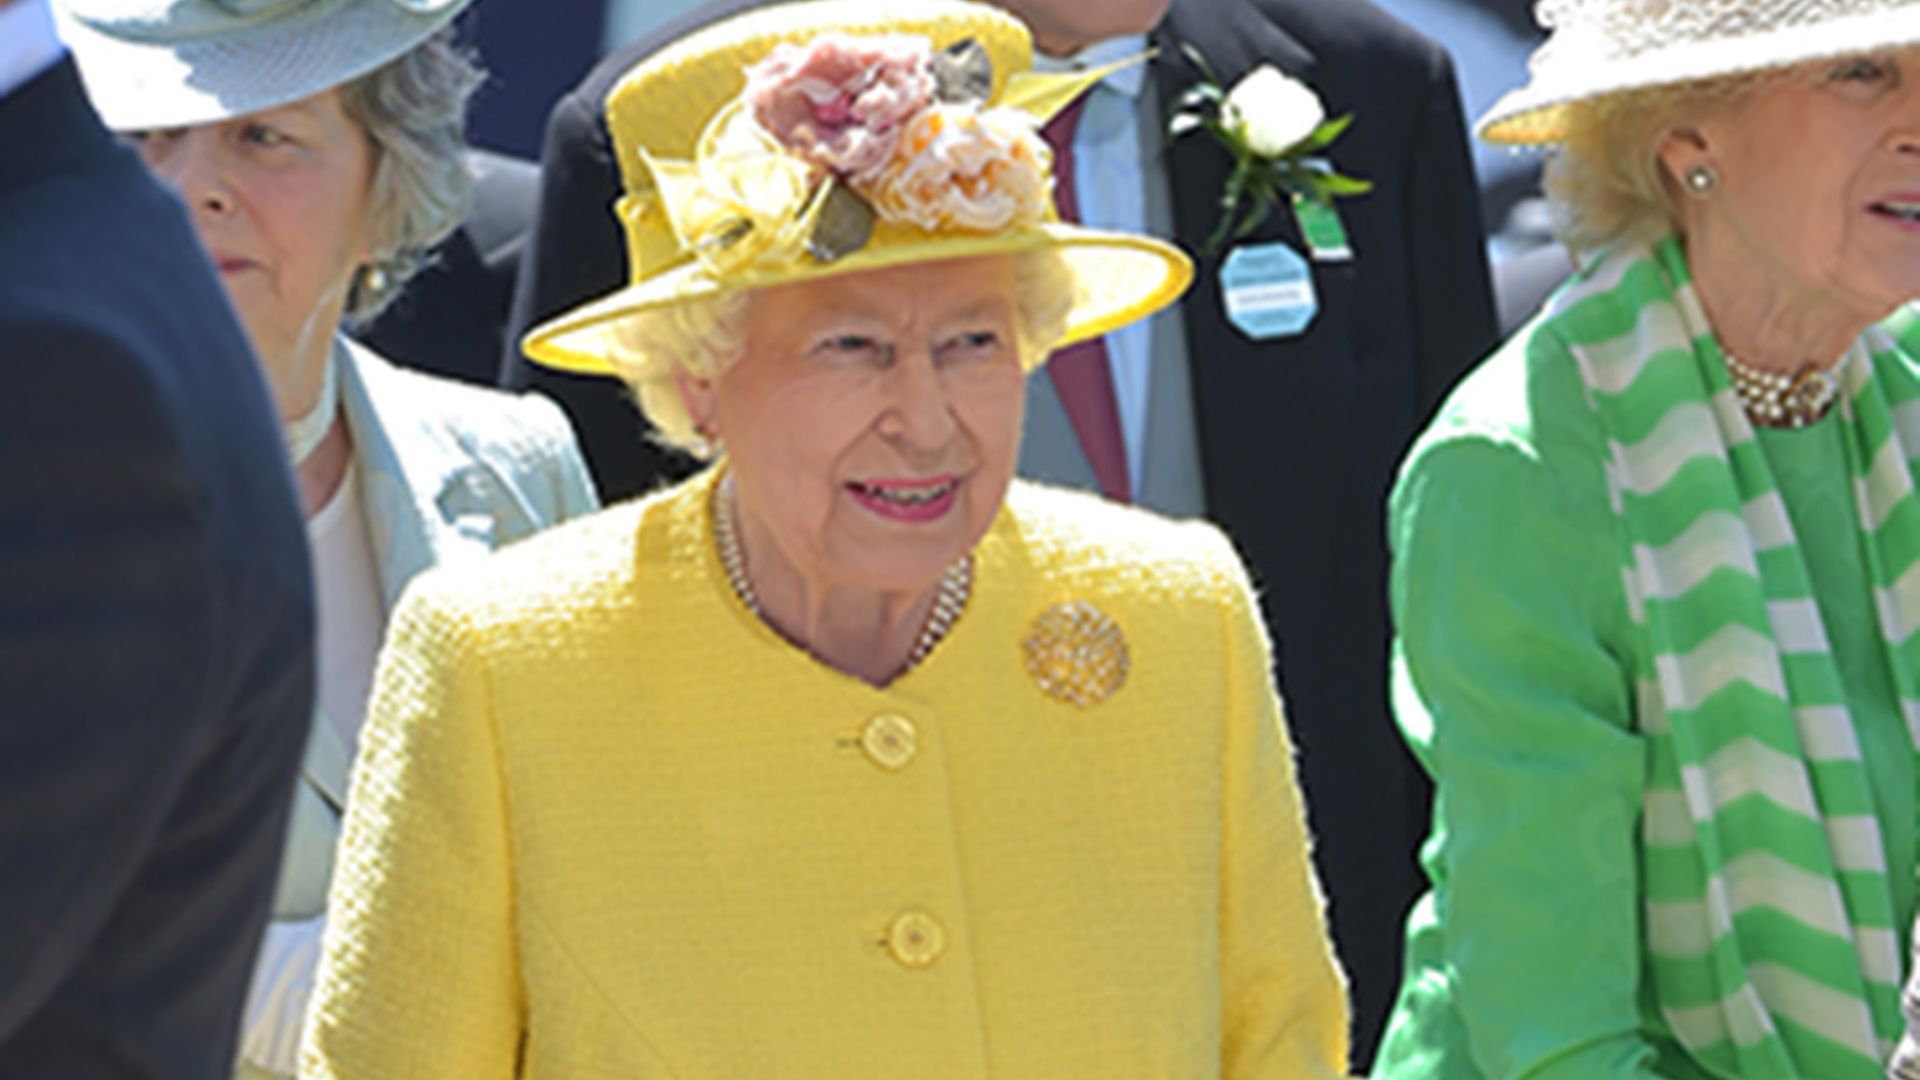 The Queen enjoys a day in the sunshine at the Epsom Derby!